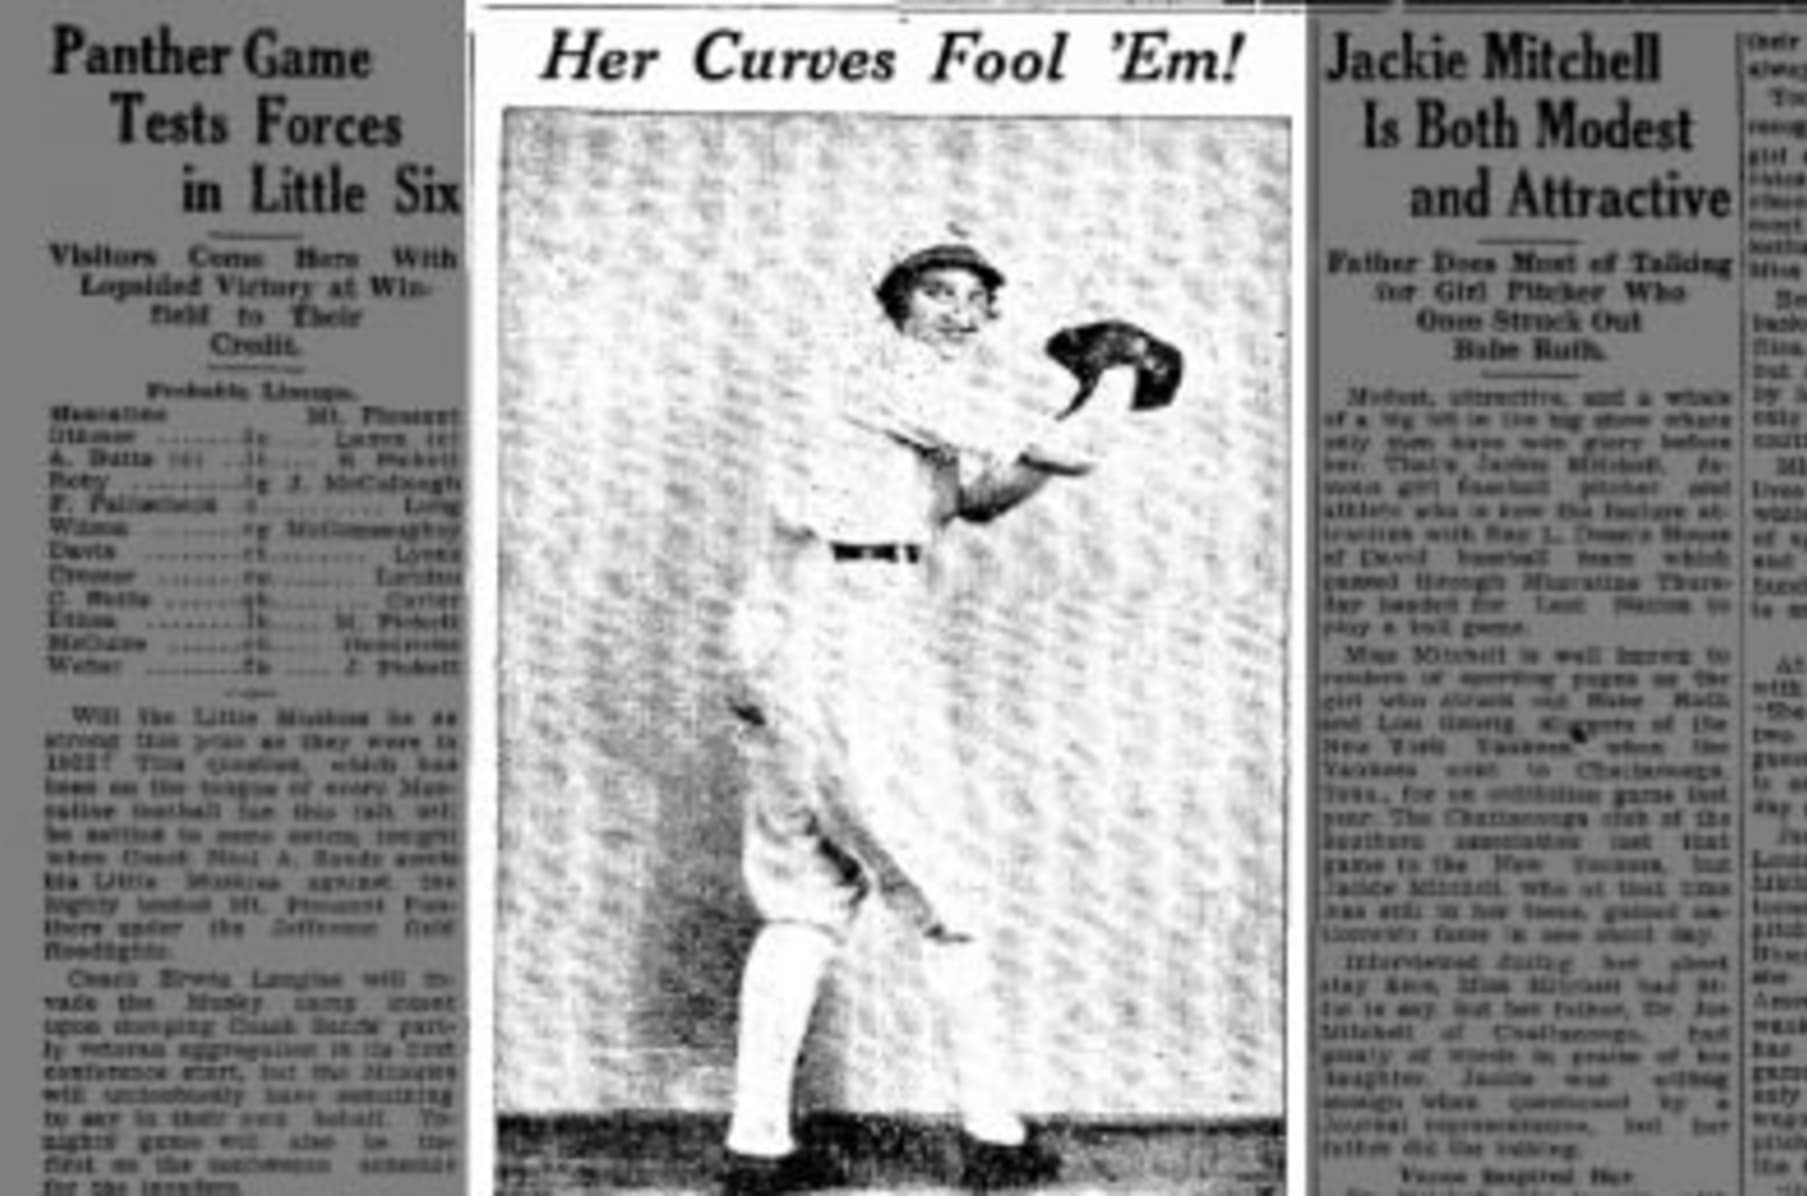 Meet Jackie Mitchell, the girl who struck out Babe Ruth